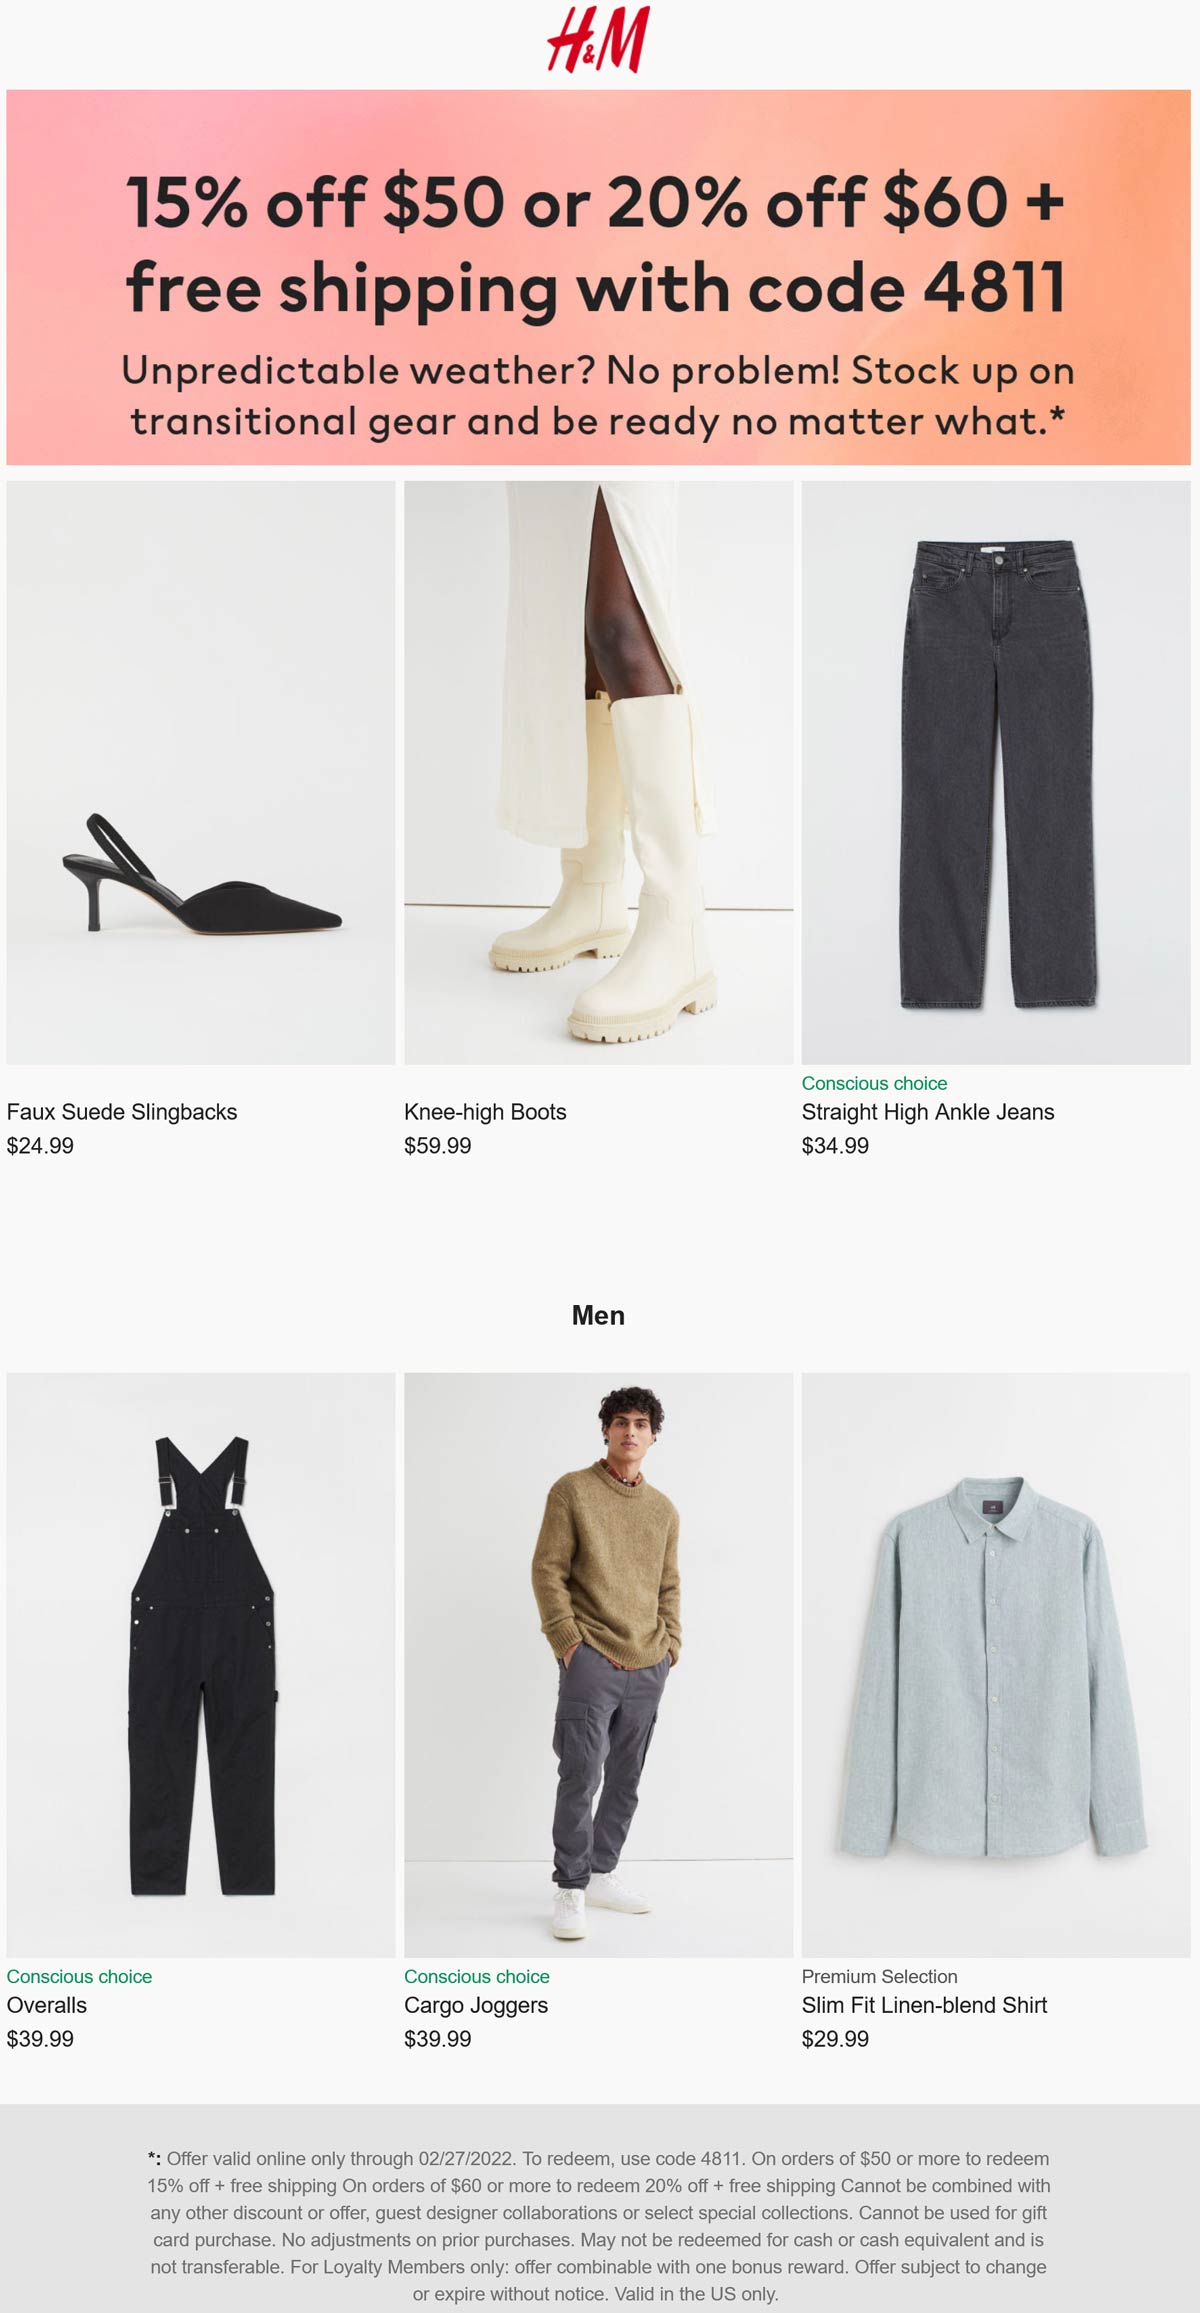 H&M stores Coupon  15-20% off $50+ at H&M via promo code 4811 #hm 